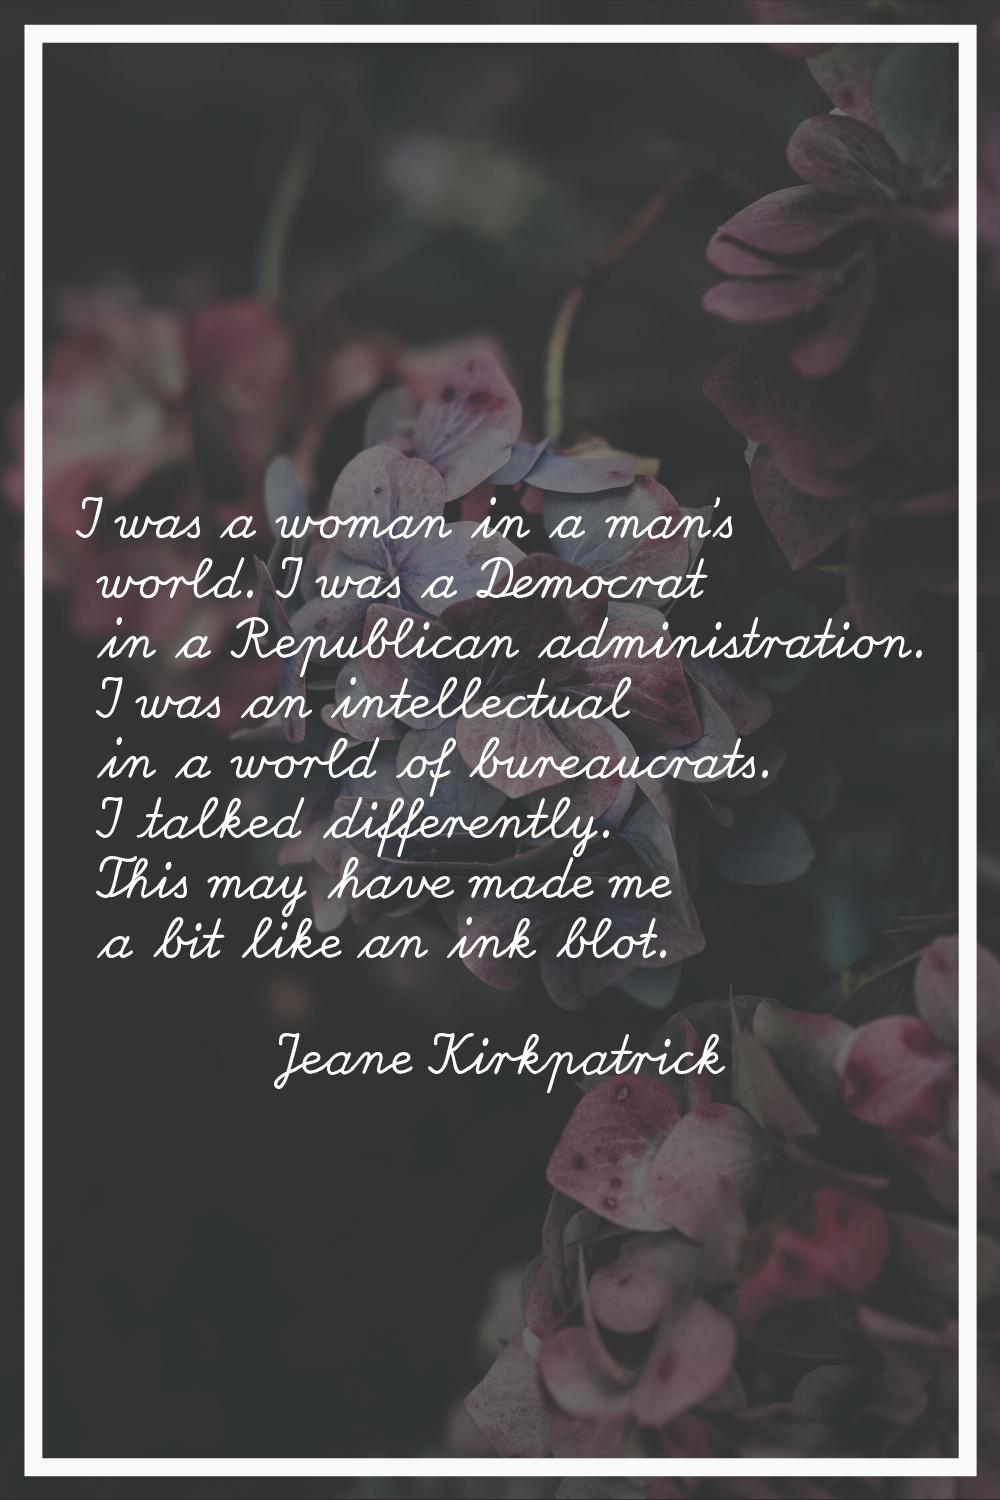 I was a woman in a man's world. I was a Democrat in a Republican administration. I was an intellect